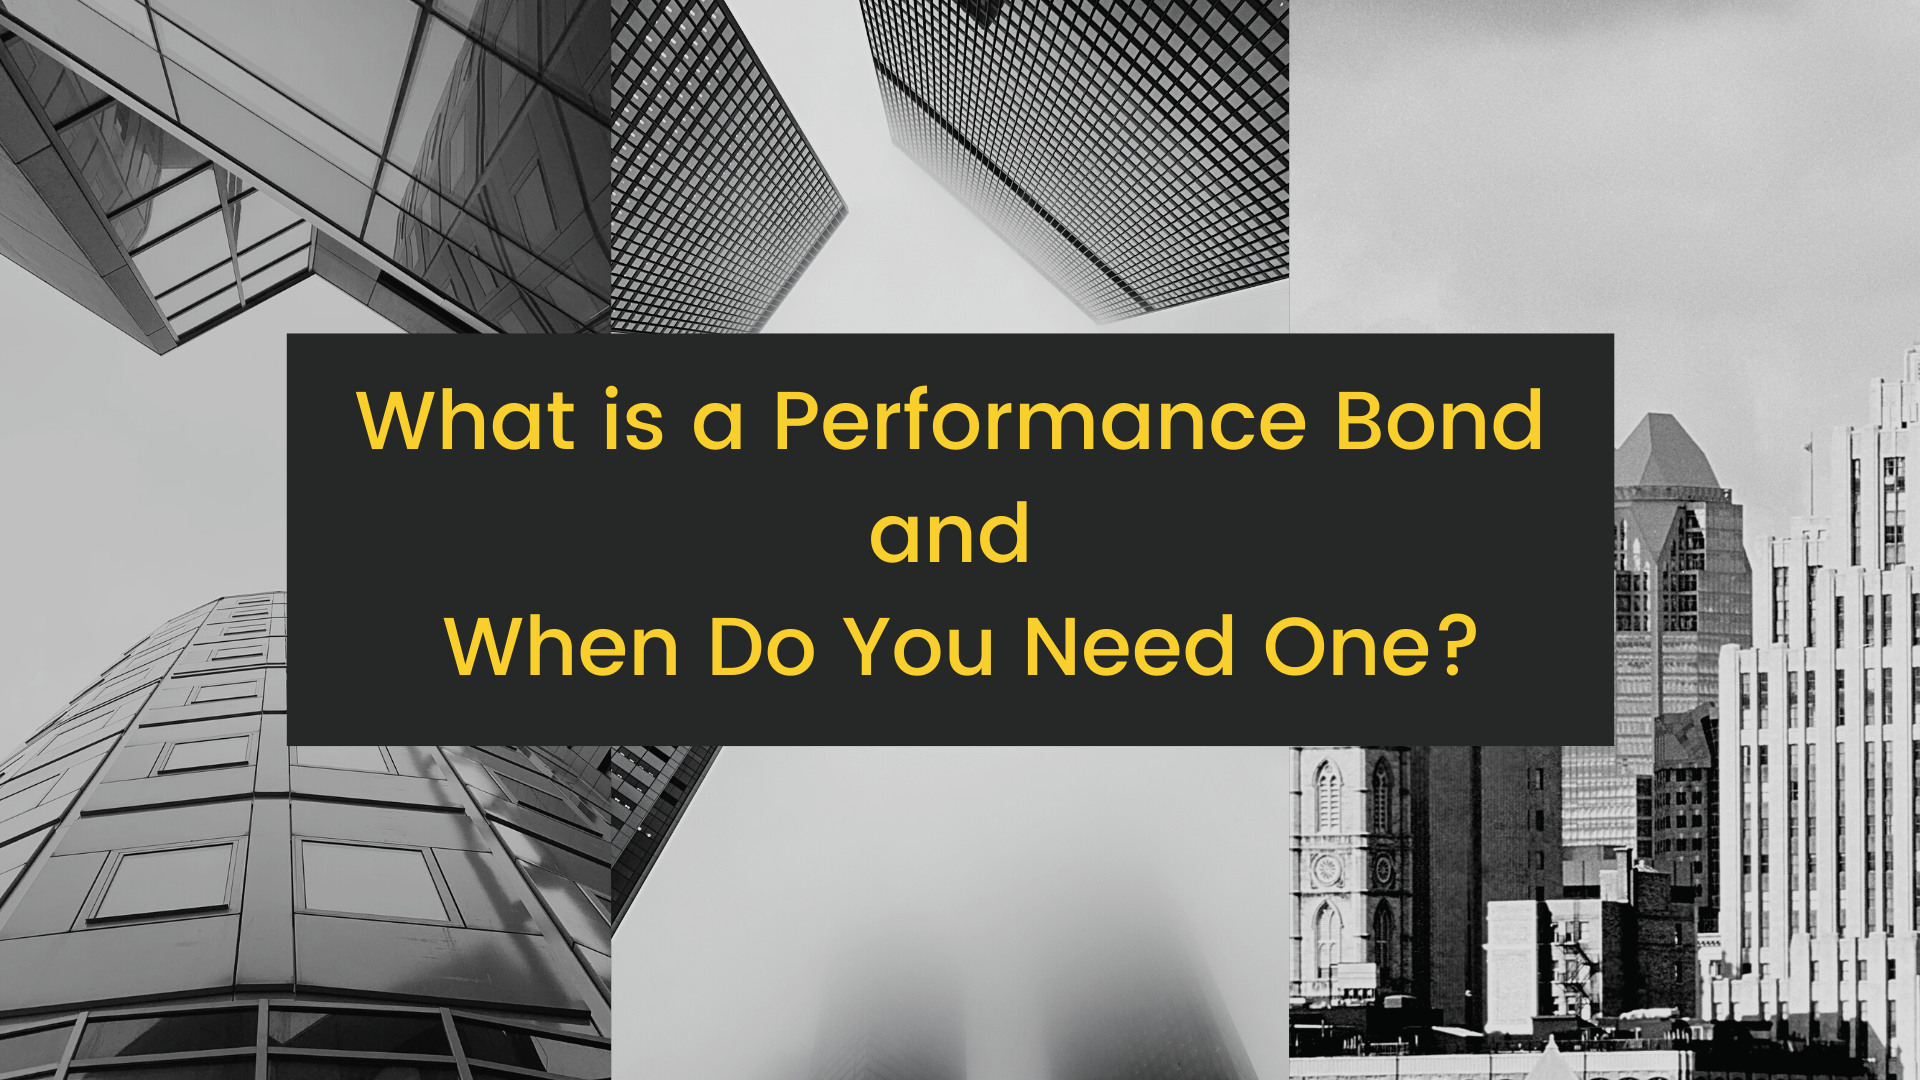 performance bond - what is a performance bond - buildings in black and white